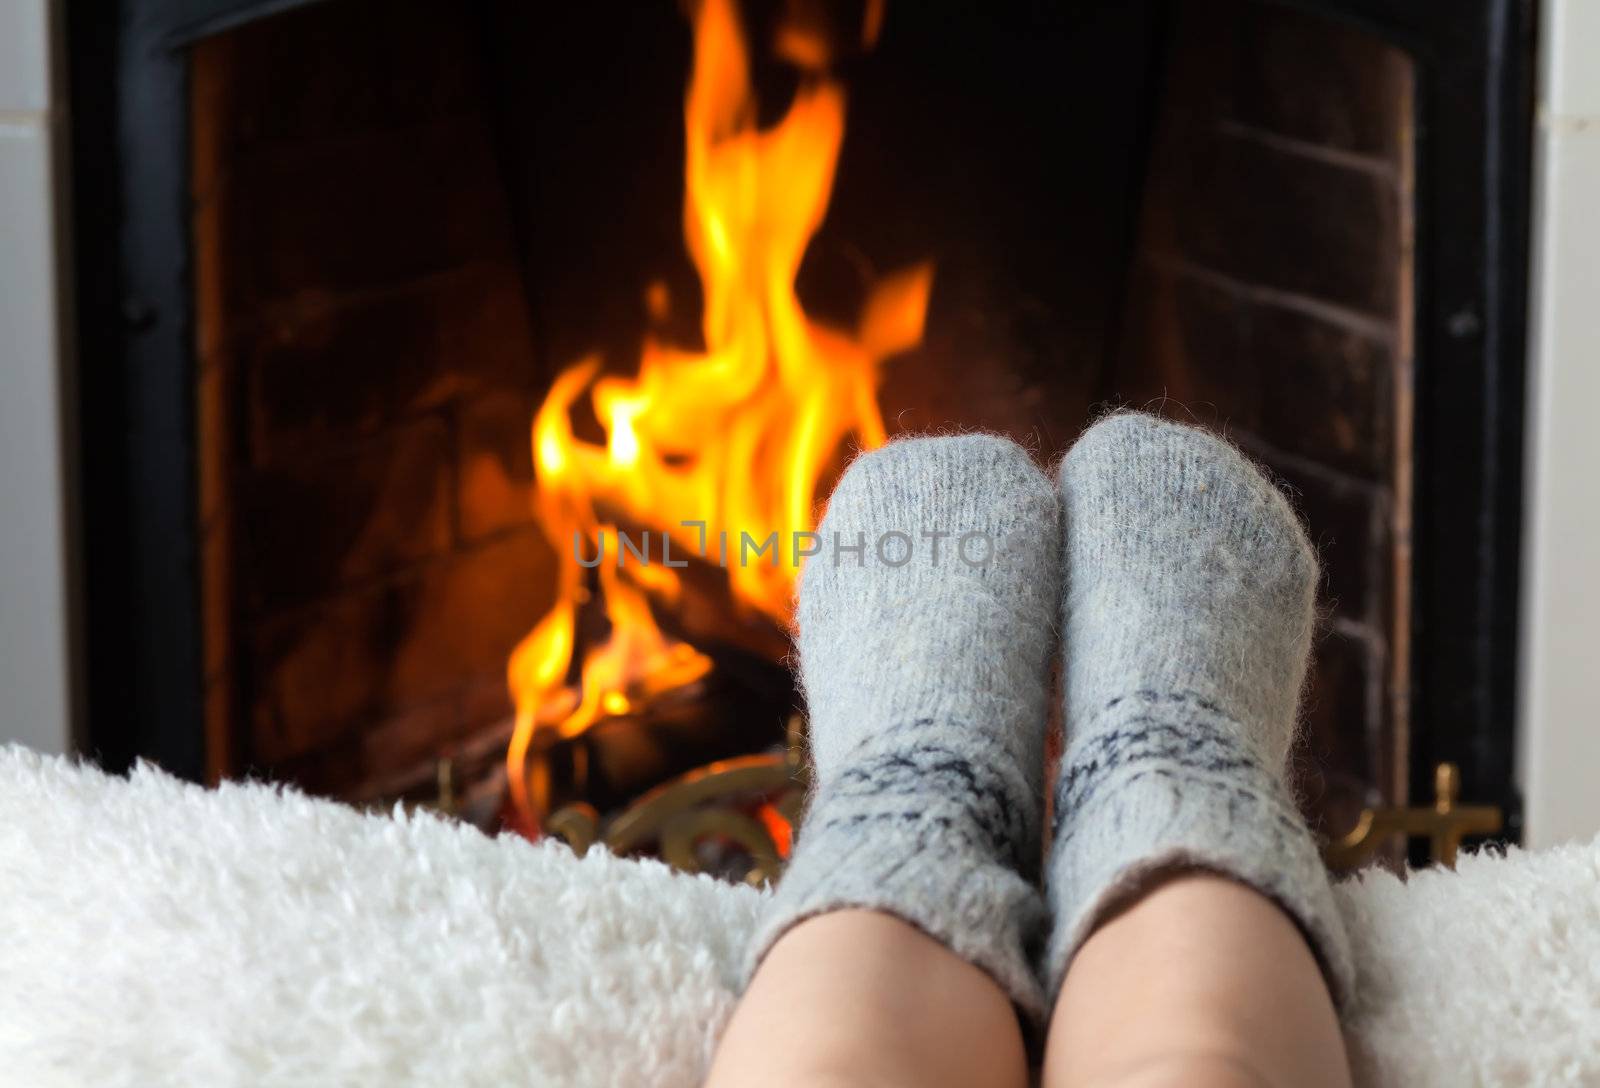 Children's feet are heated in the fireplace by Antartis